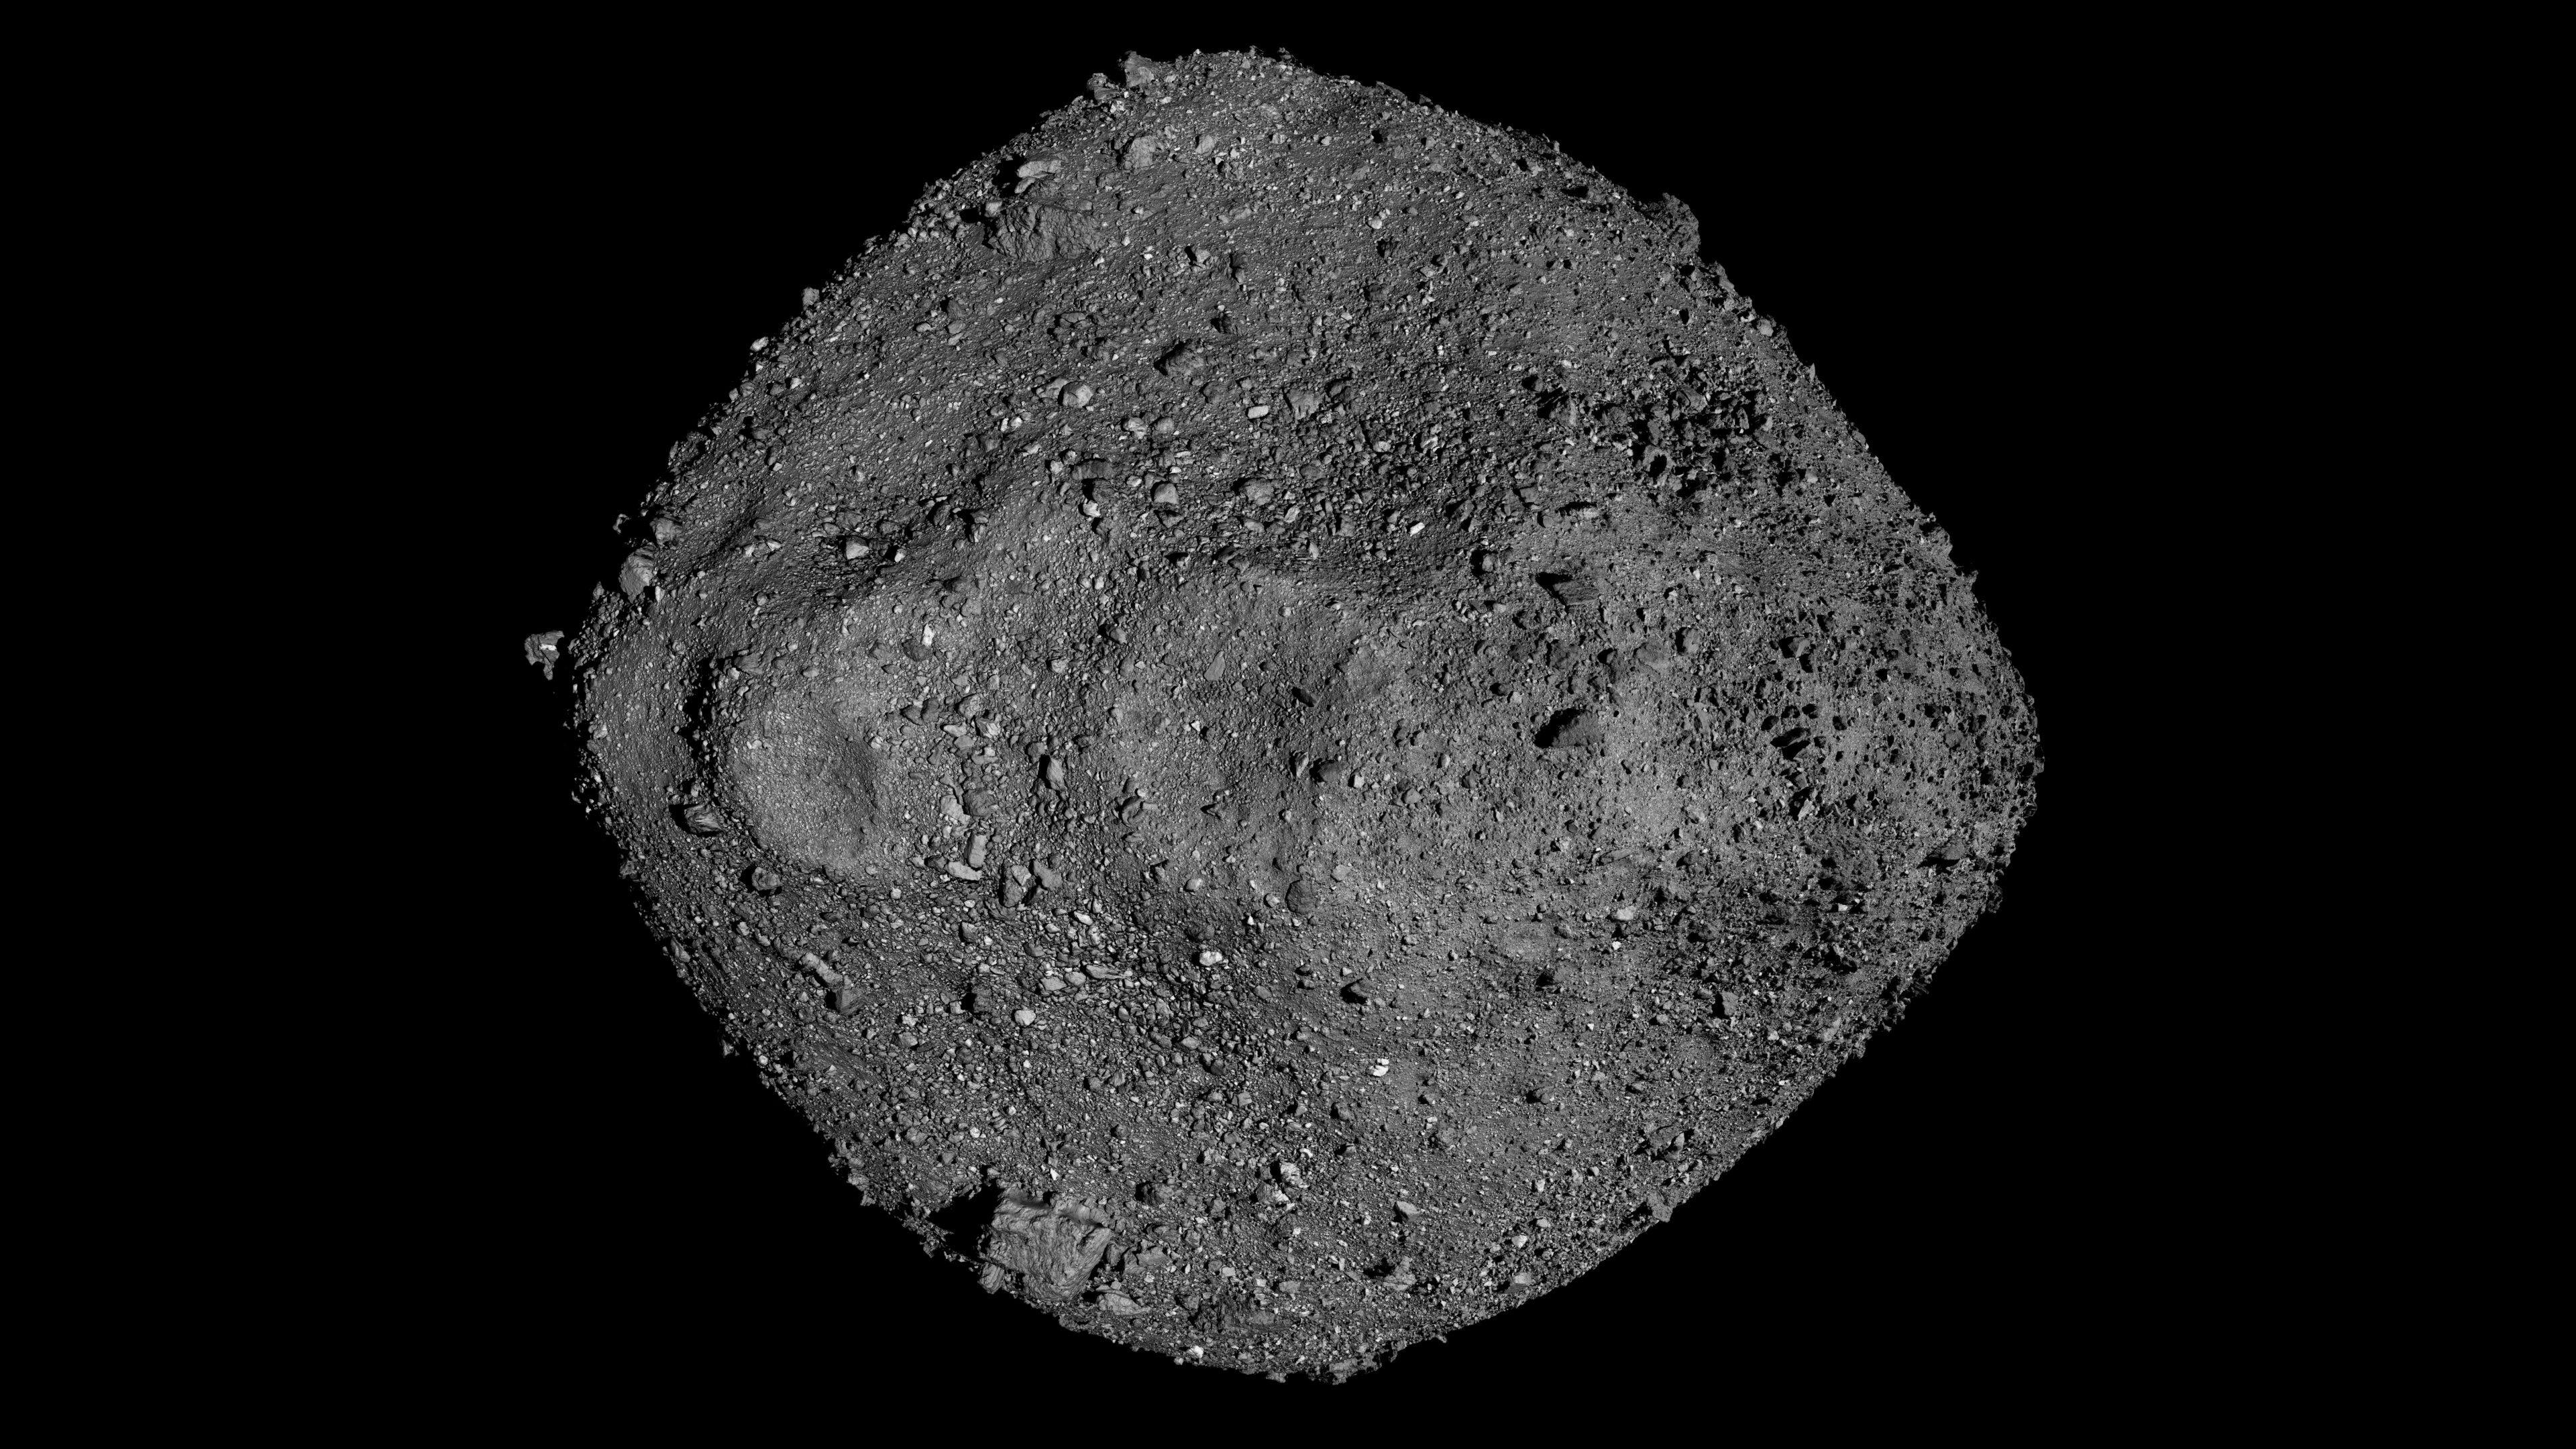 Composite image of asteroid Bennu taken by the OSIRIS-REx cameras onboard.